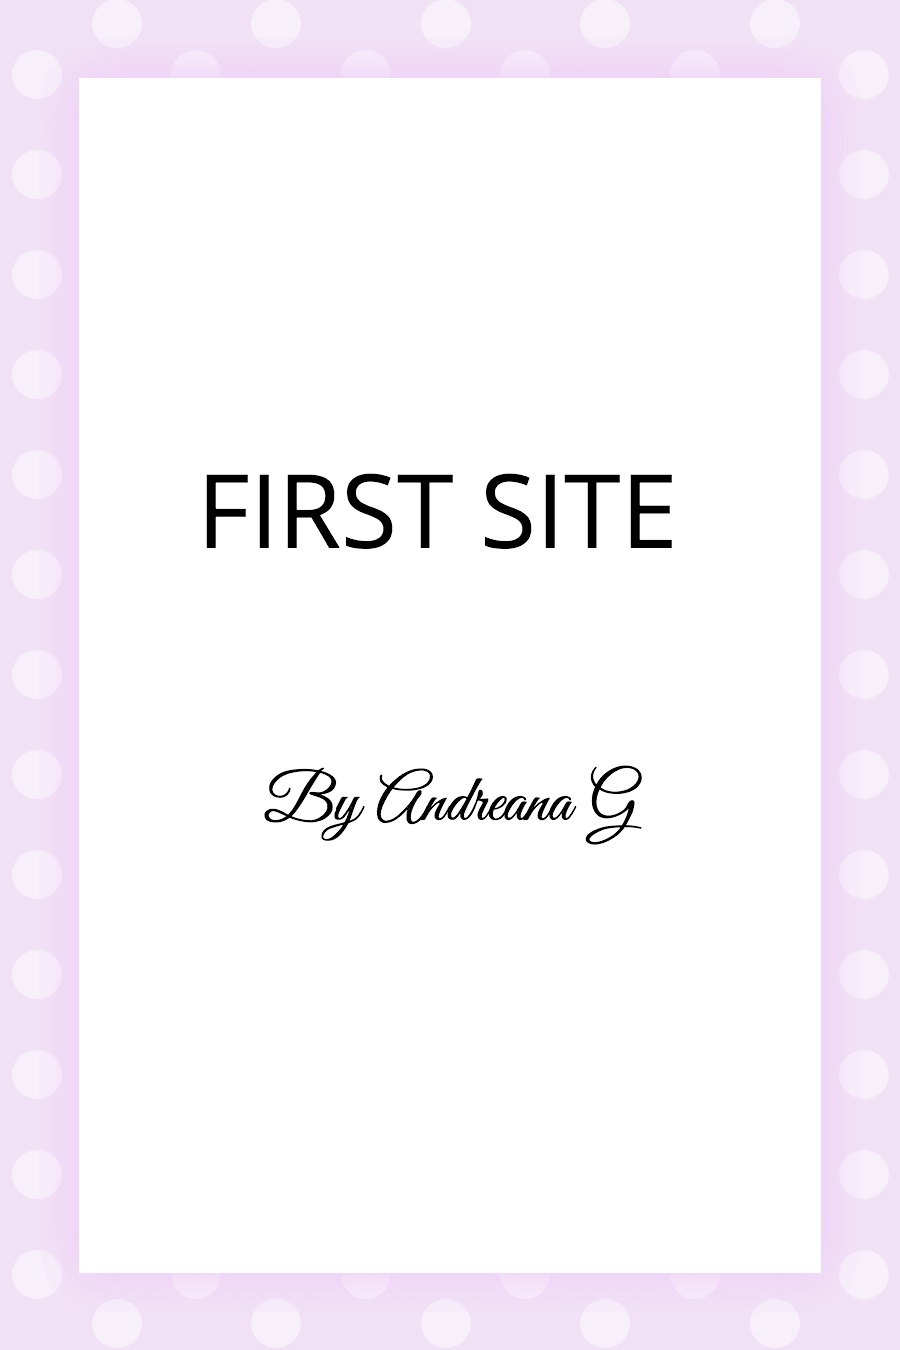 First Site by Andreana G